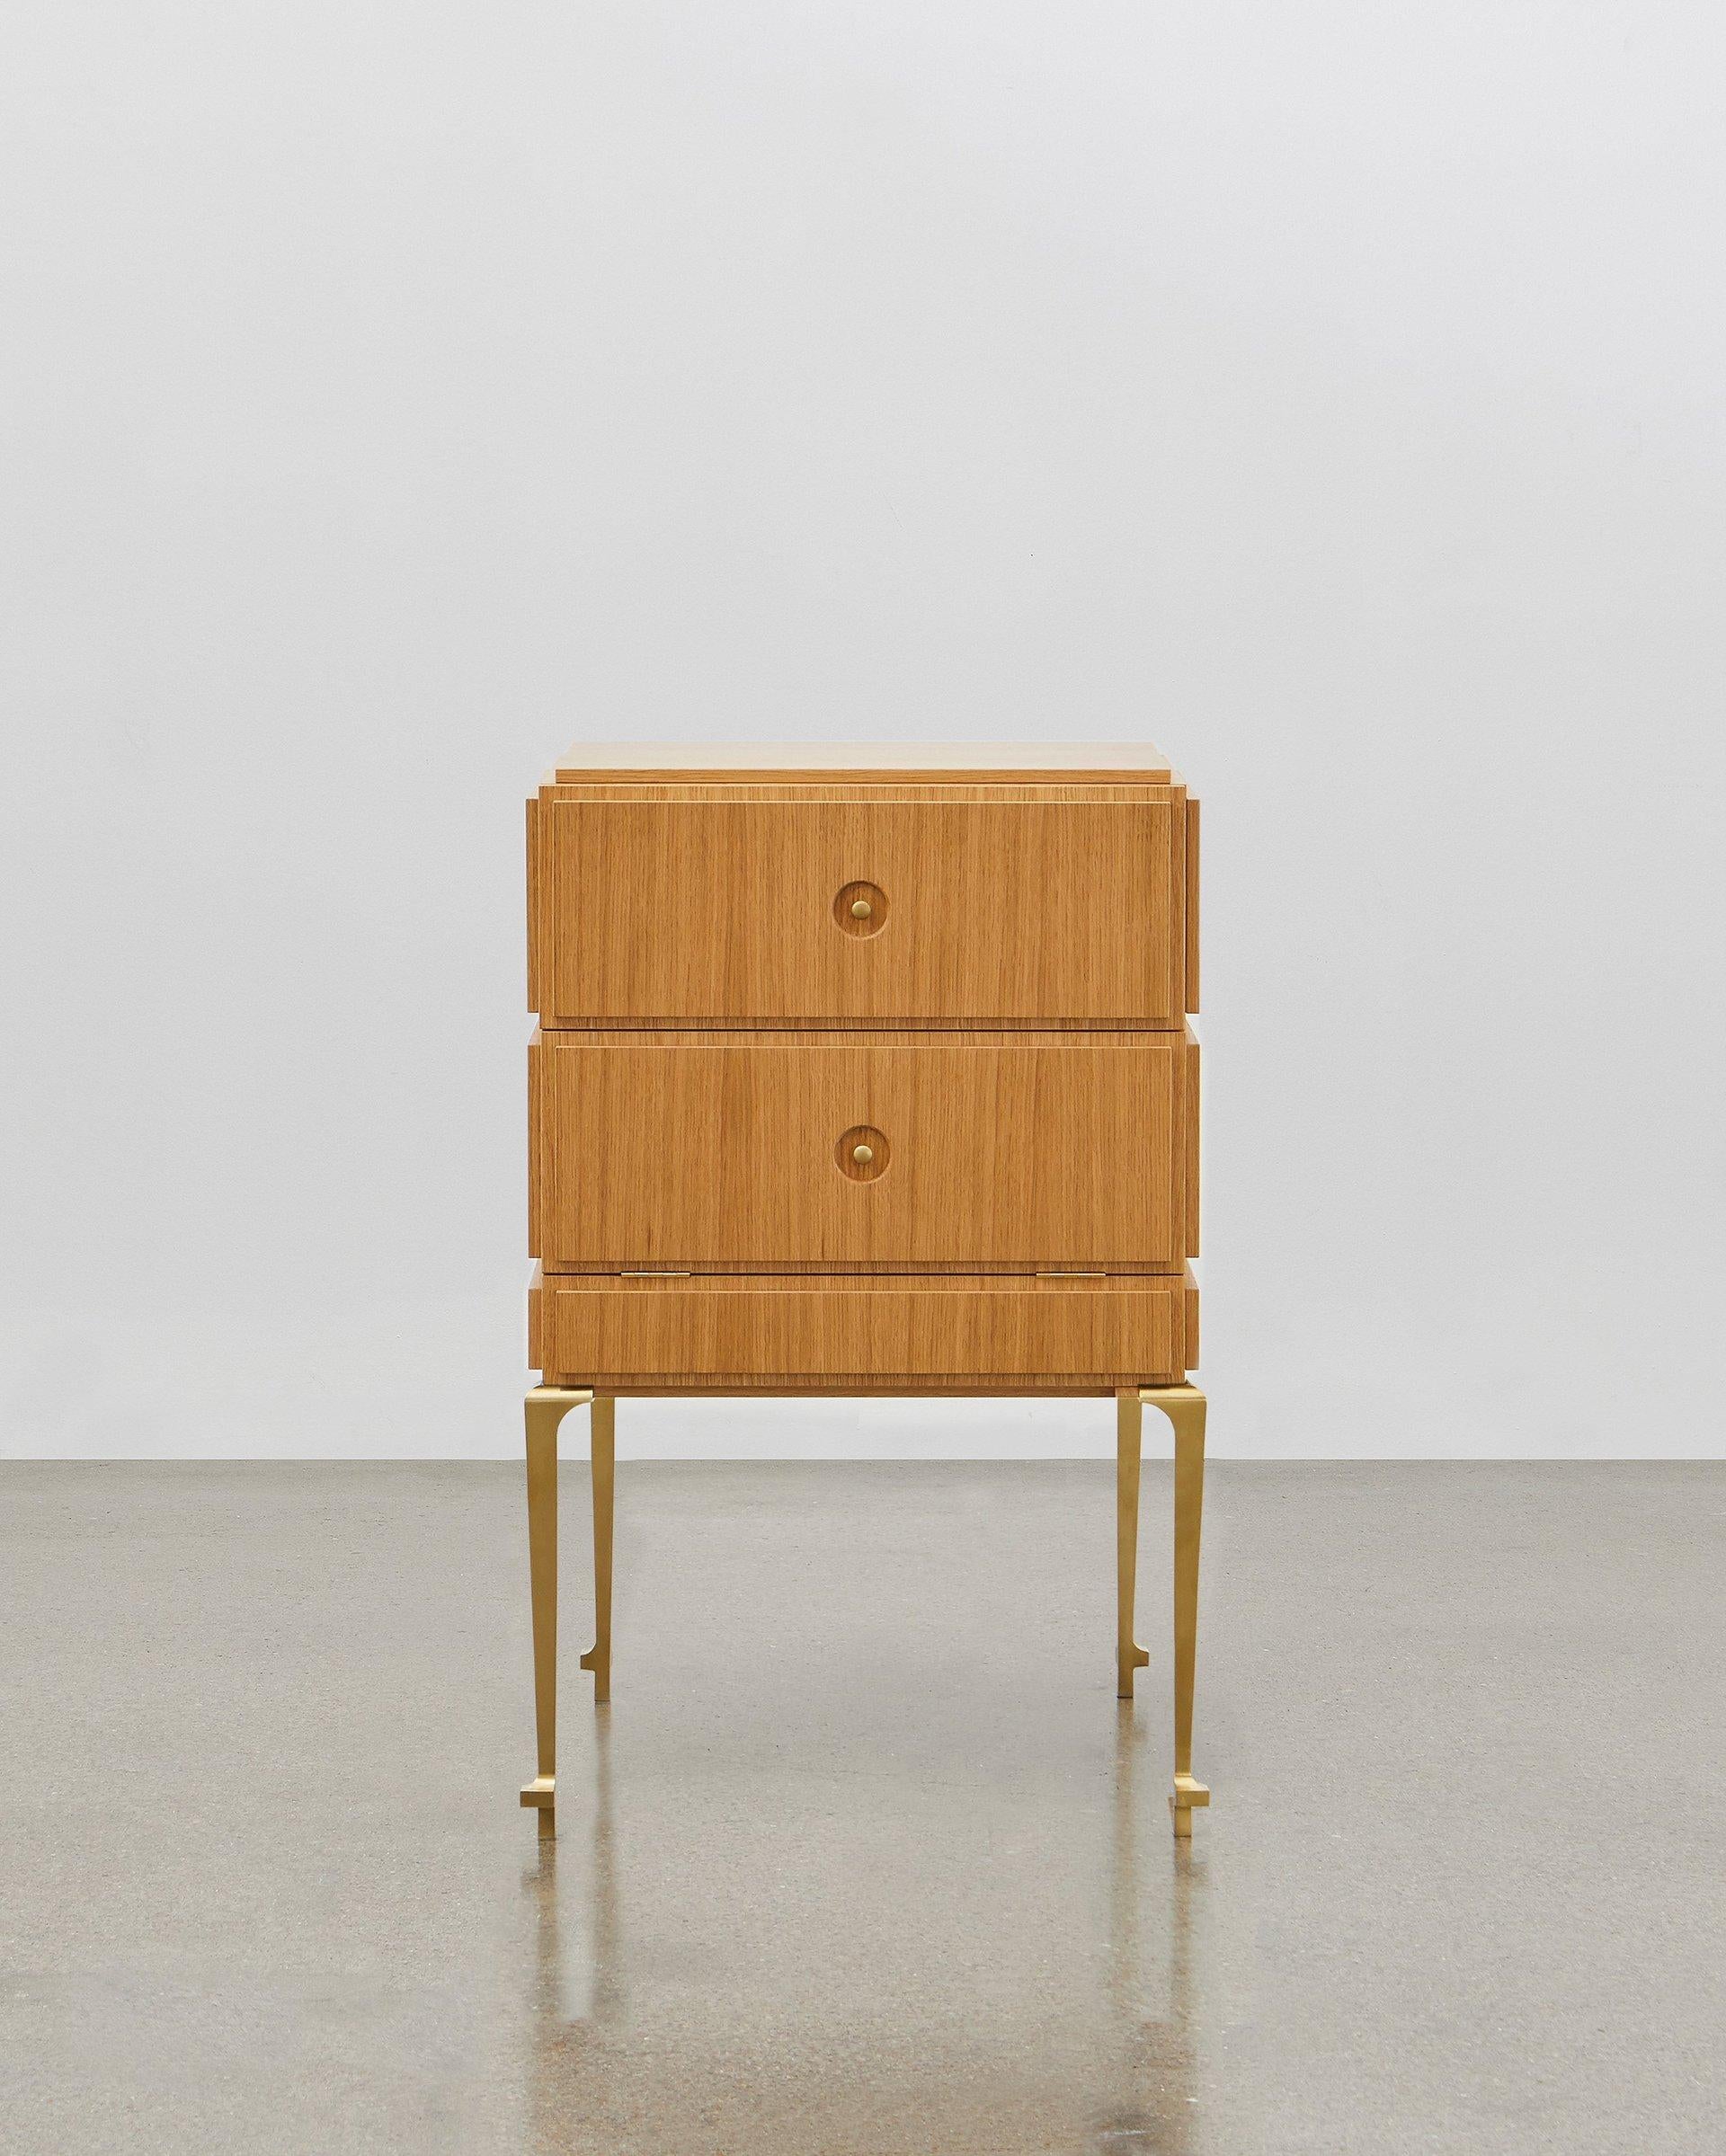 This small but perfectly formed storage piece is made out of wood and can be combined with soft leather on the panels.

It is elegant and stylish all the way around and from all angles. Poul Henningsen designed this in 1920.

The PH small drawer